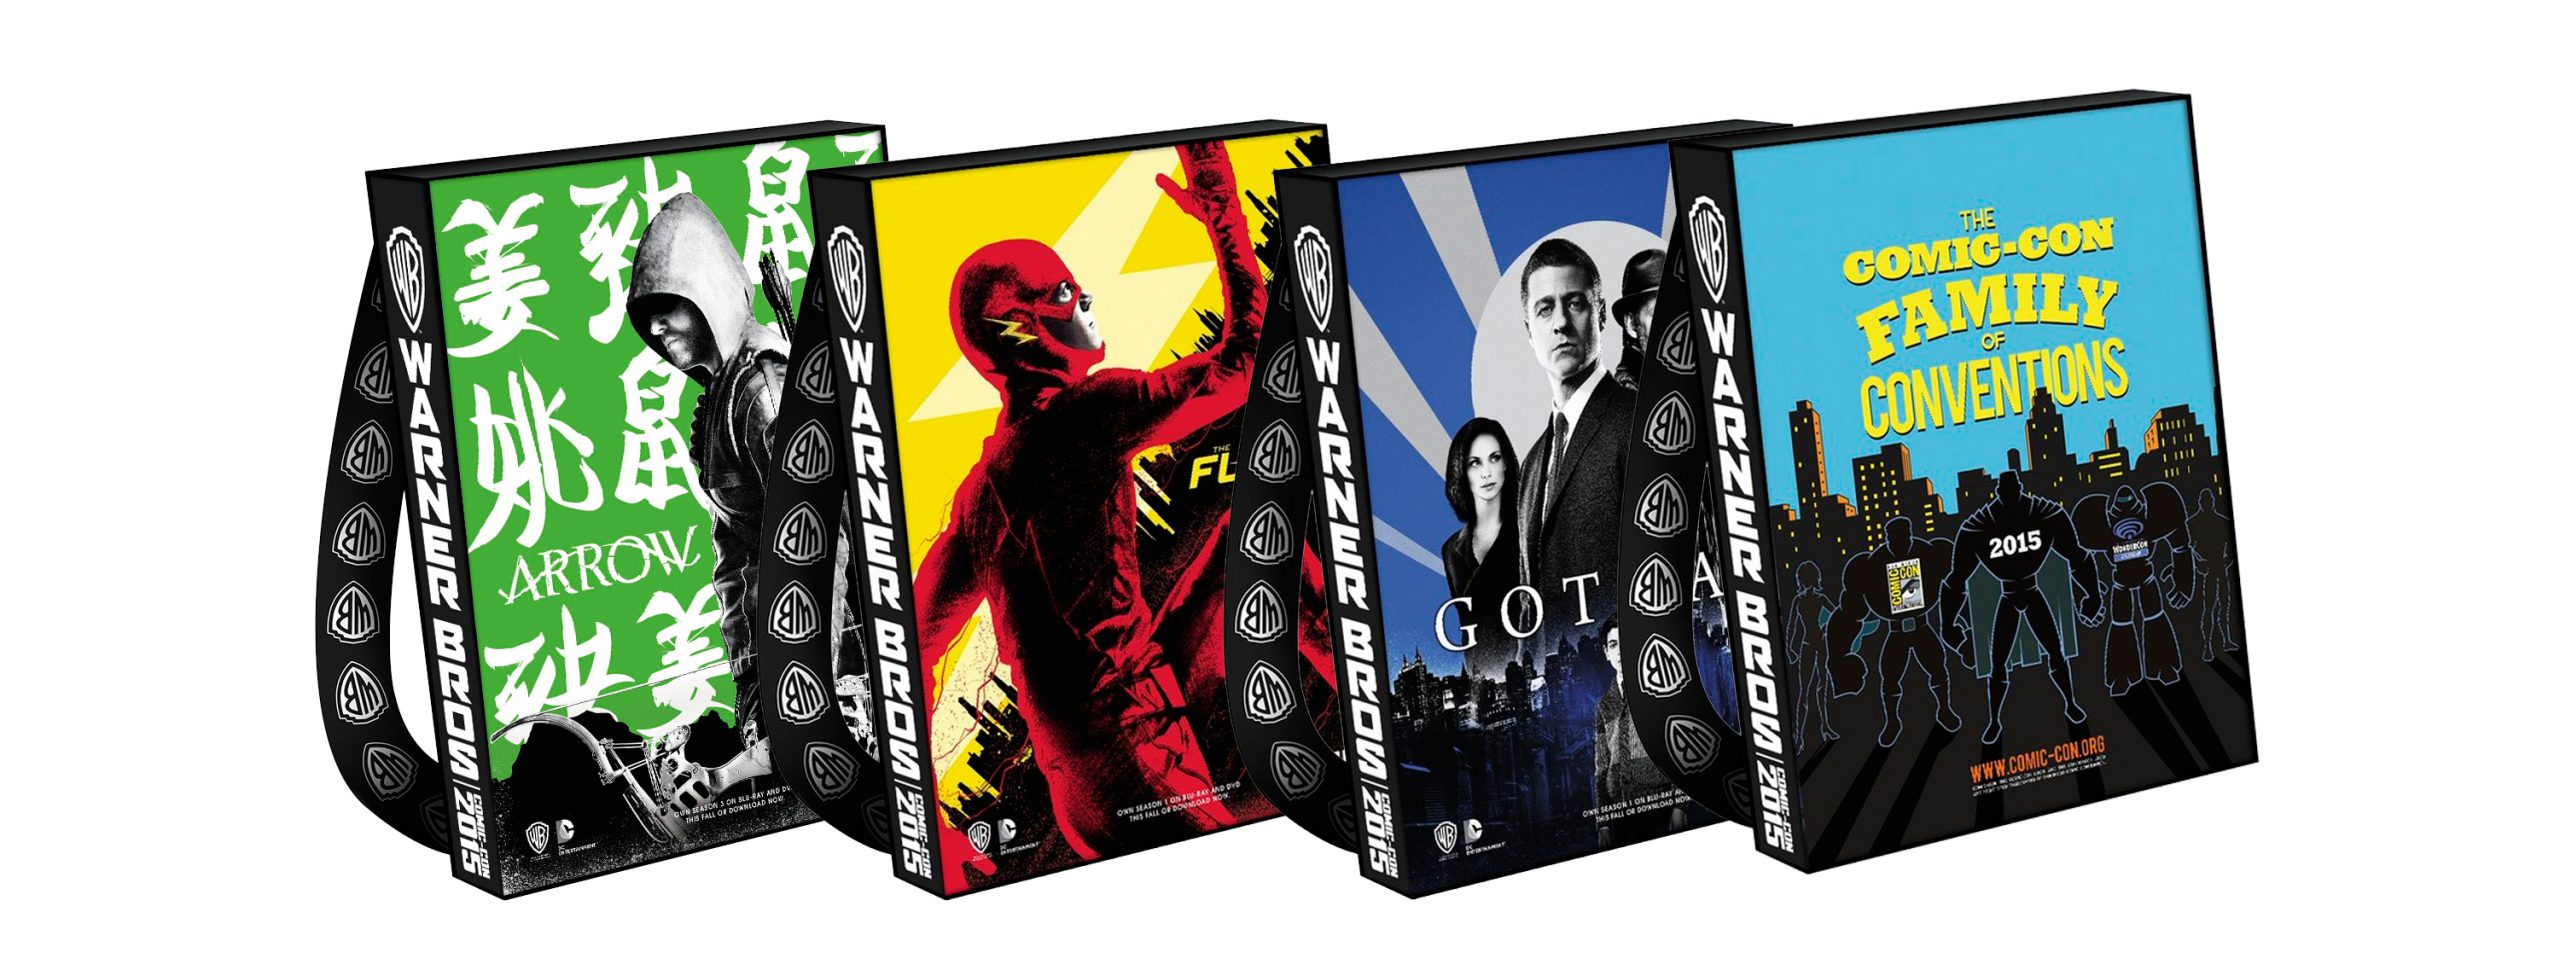 This Year's Comic-Con Bags Will be Brought to You by Warner Bros. TV